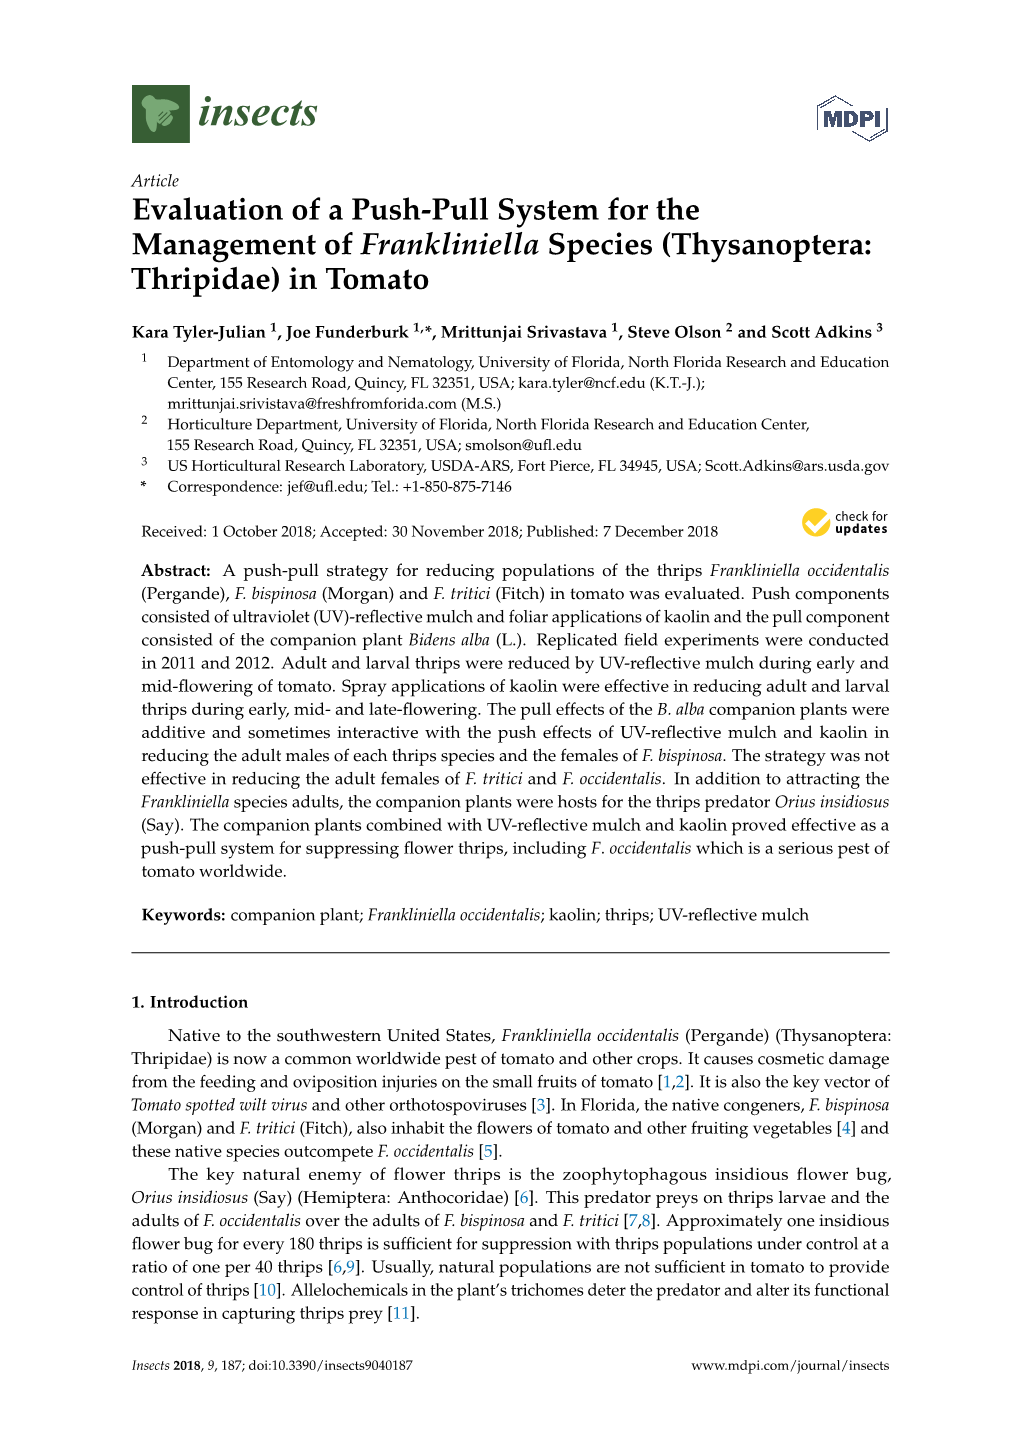 Evaluation of a Push-Pull System for the Management of Frankliniella Species (Thysanoptera: Thripidae) in Tomato